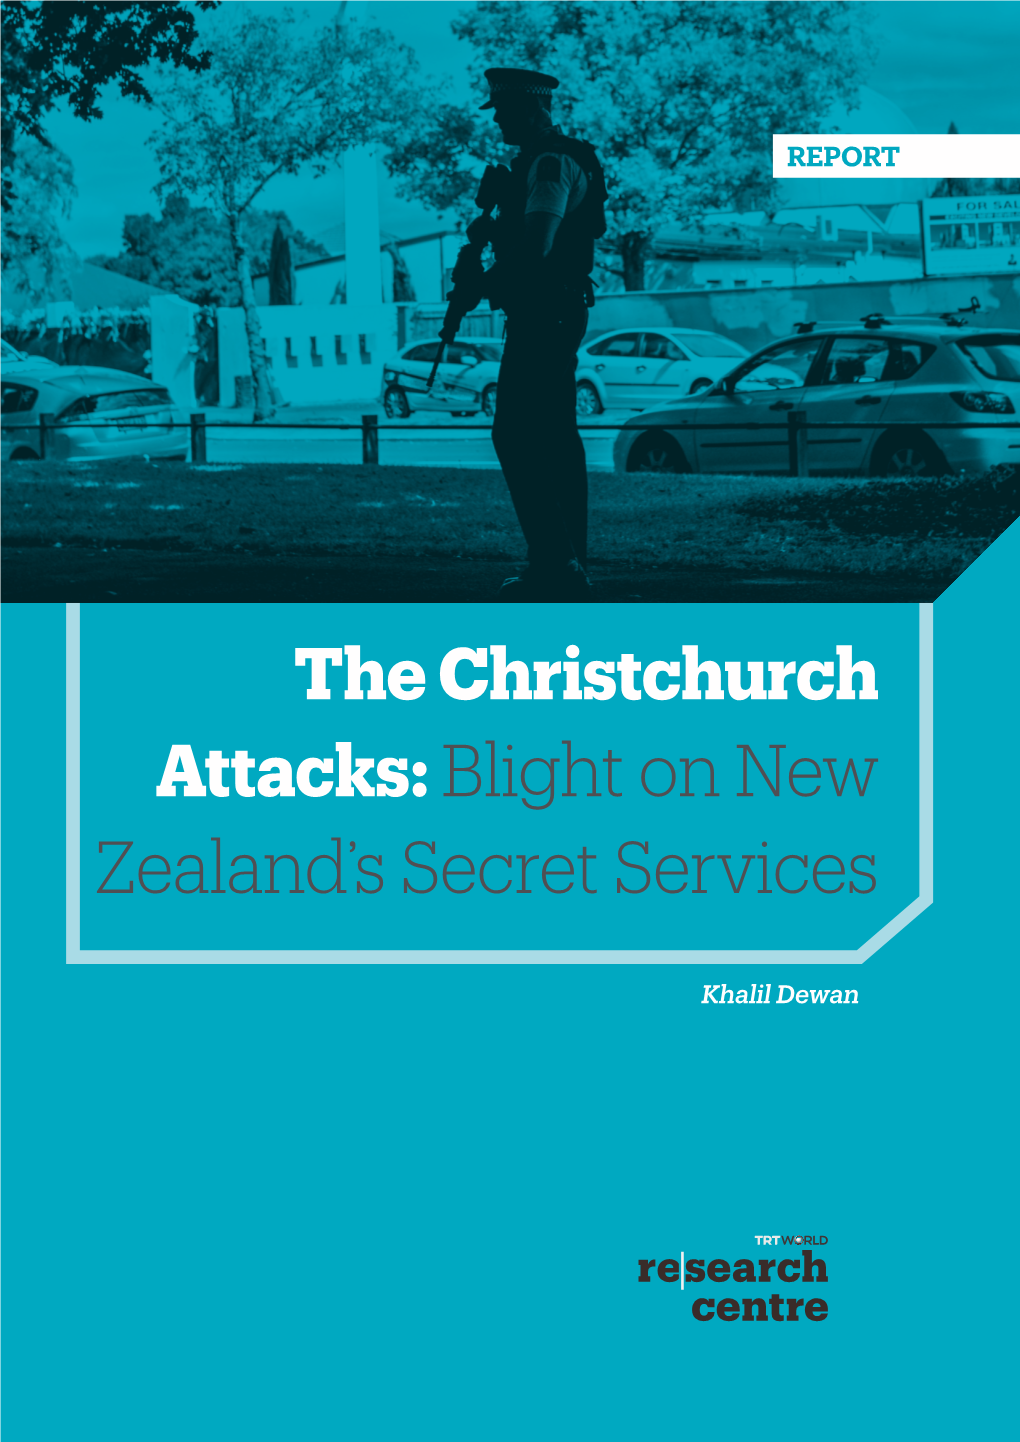 The Christchurch Attacks: Blight on New Zealand's Secret Services